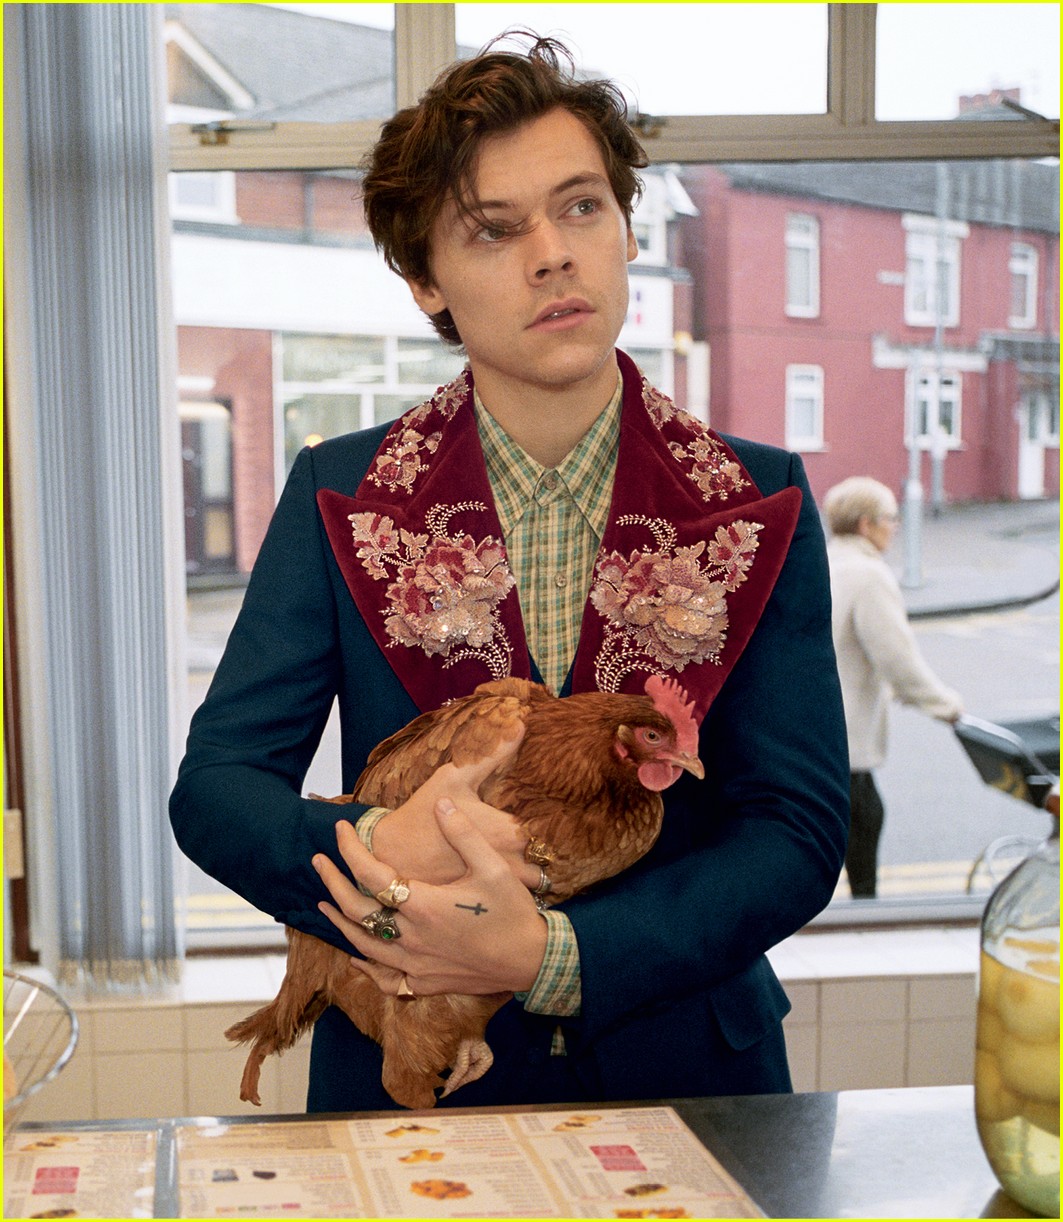 harry styles gucci campaign 02